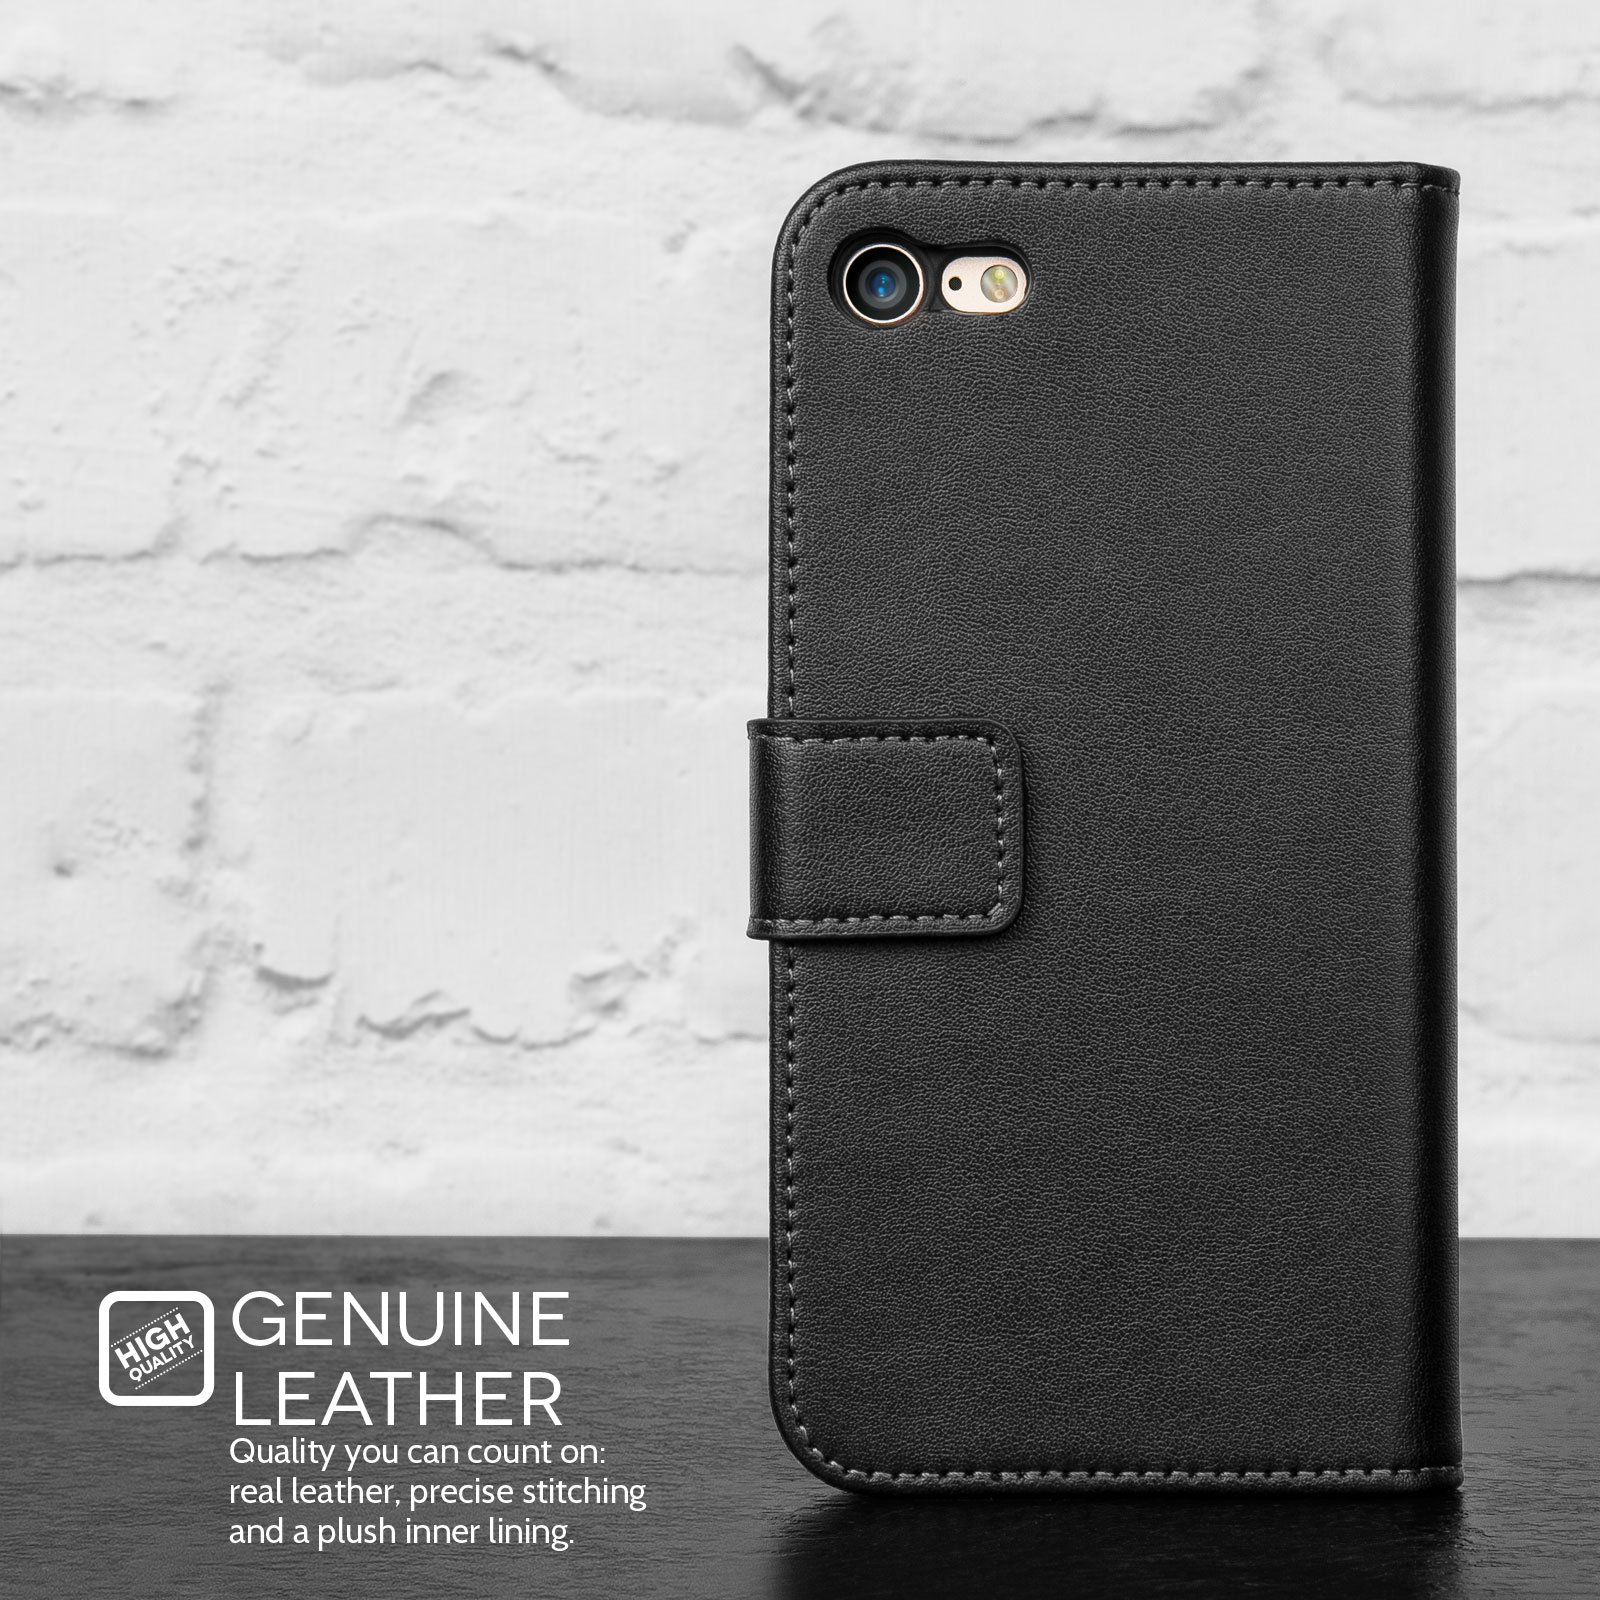 Caseflex iPhone 7 Real Leather Wallet Case - Black